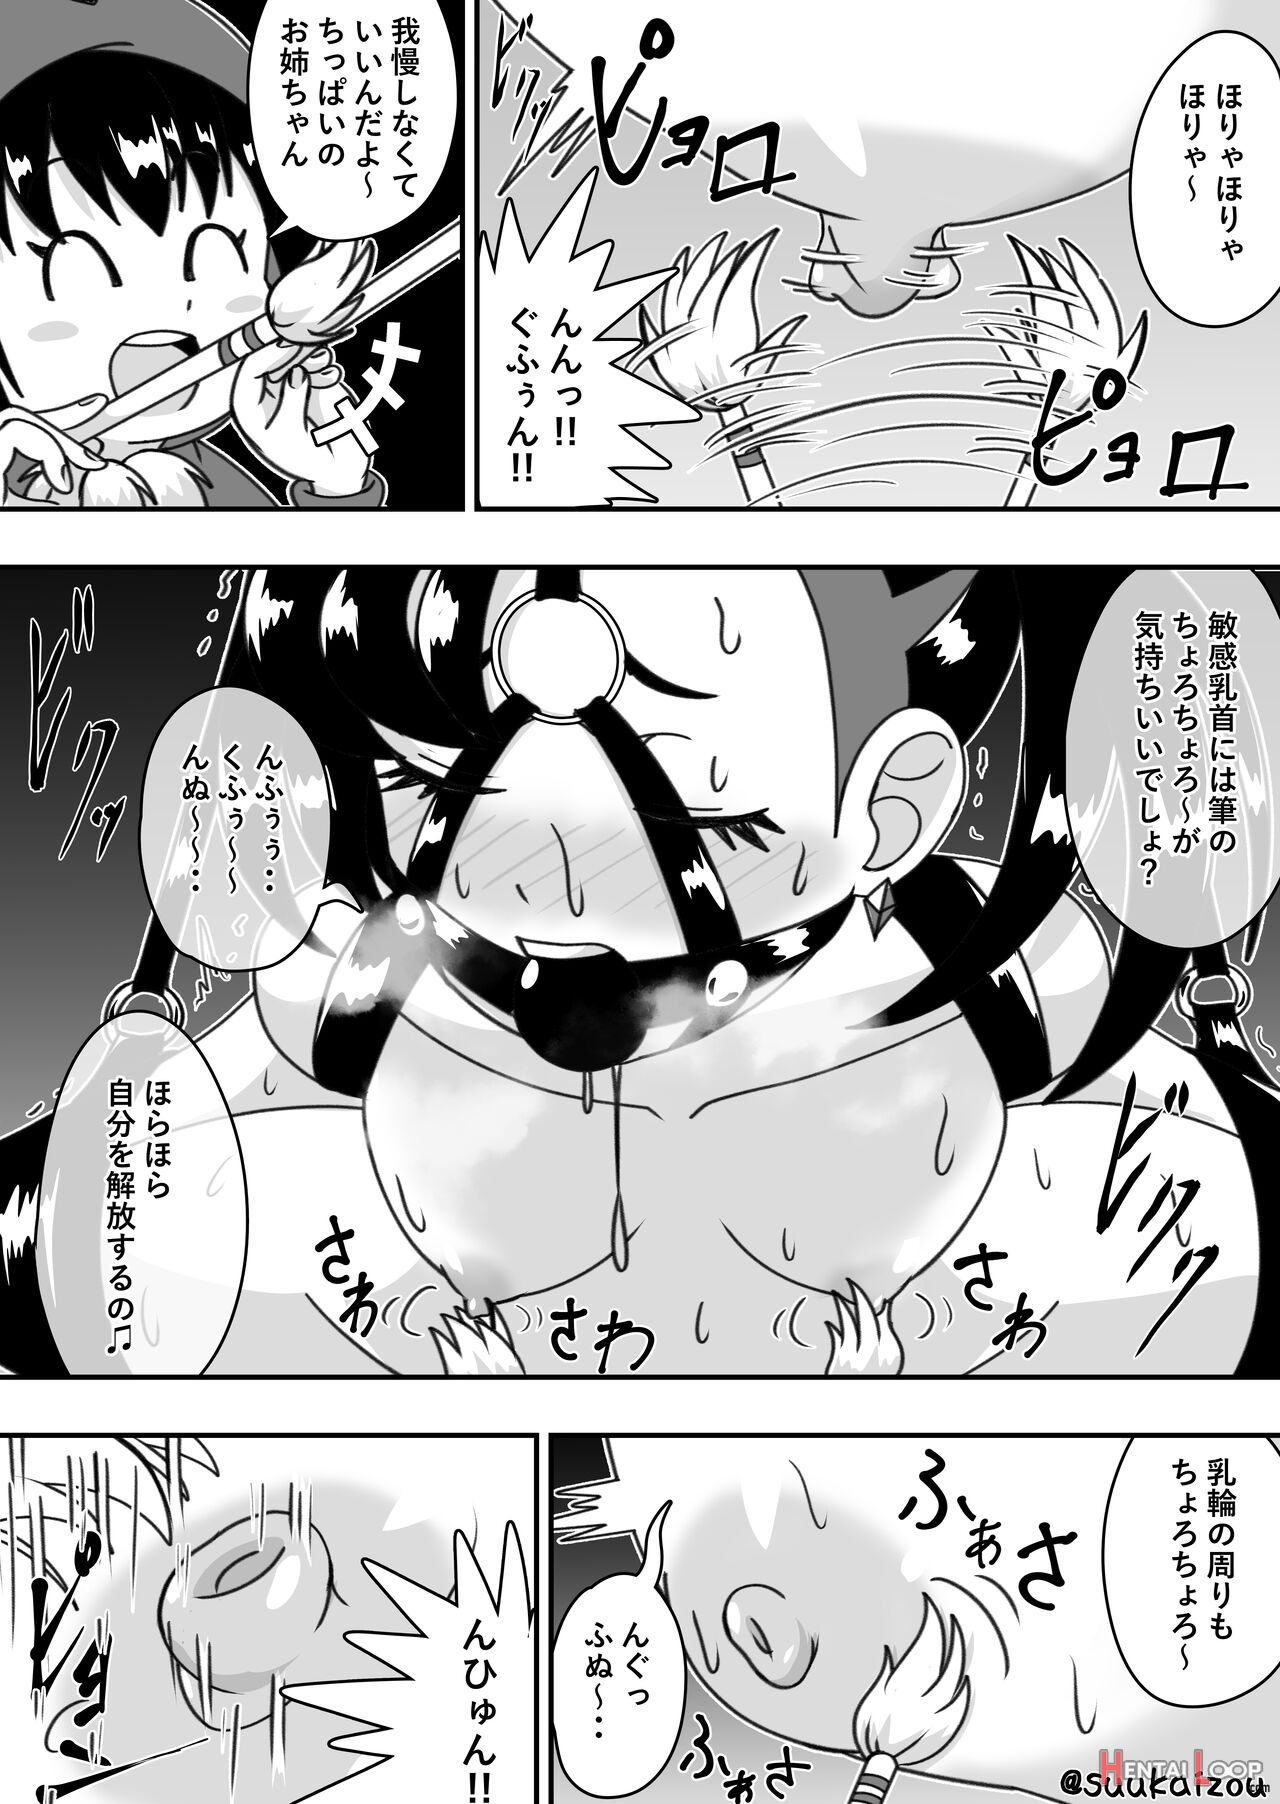 Marie-chan Punishment Started page 24